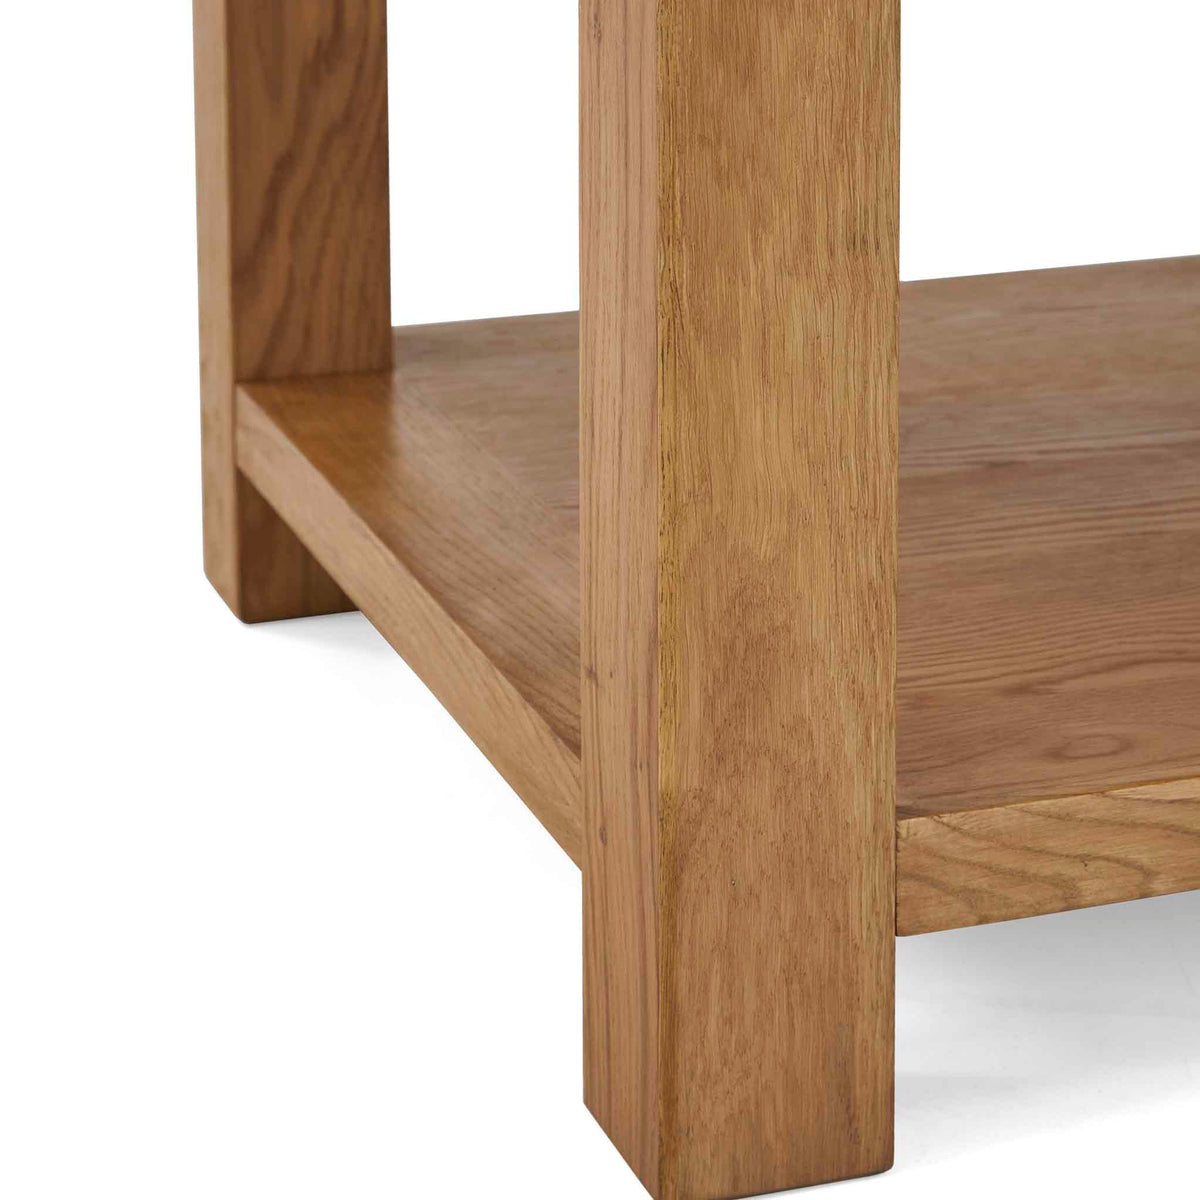 Zelah Oak Large Coffee Table - Close up of lower shelf and legs